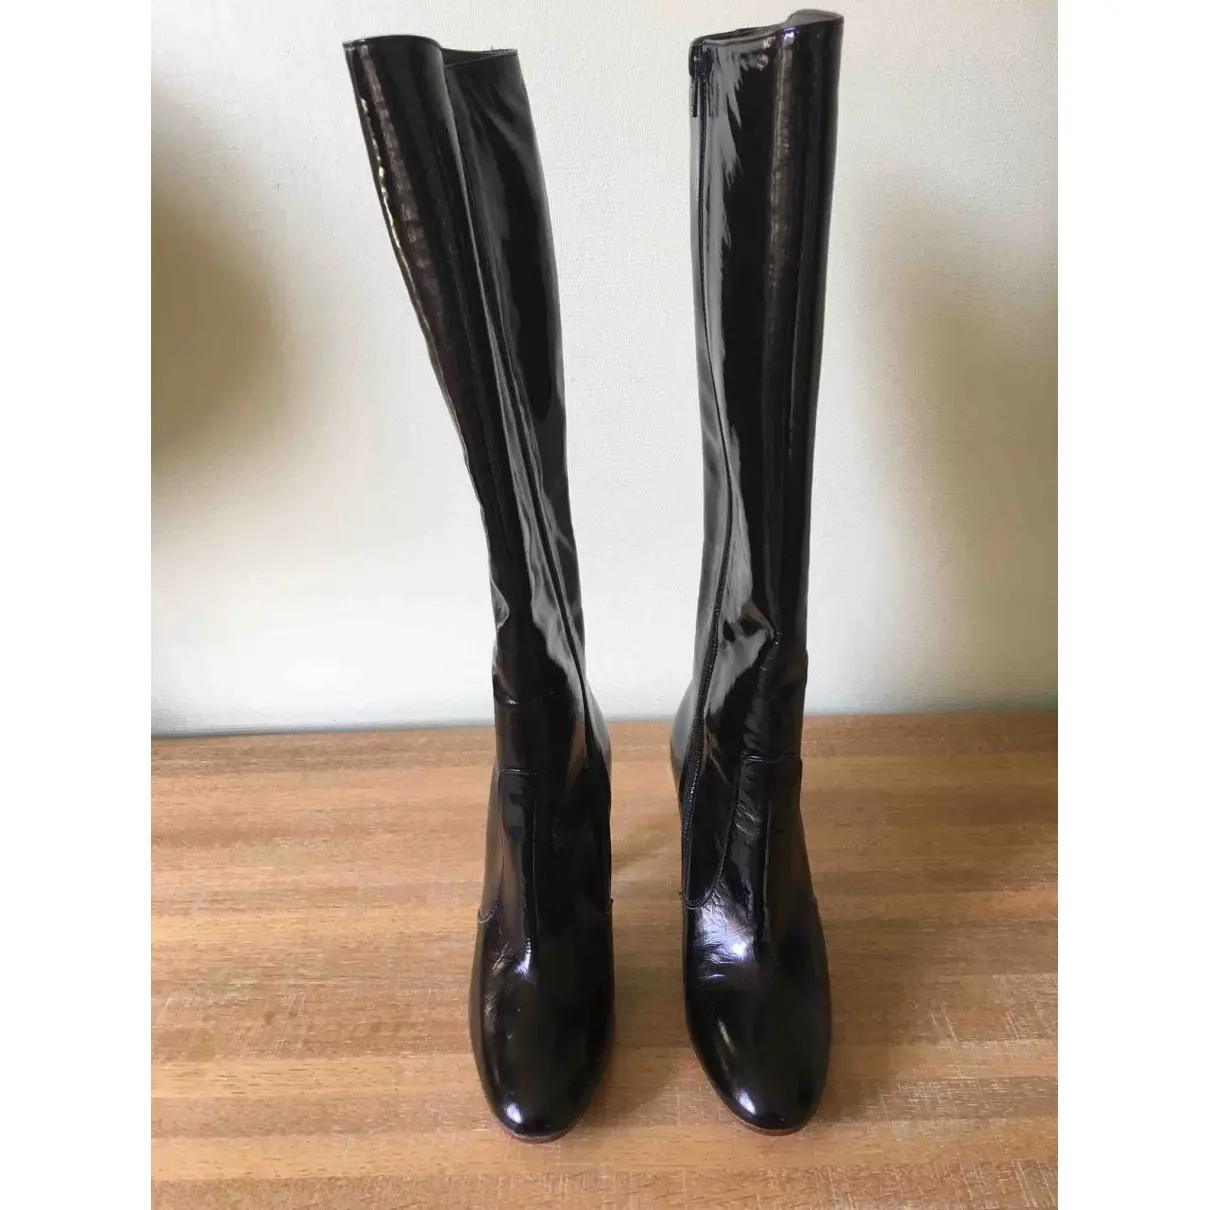 Buy Michel Perry Patent leather boots online